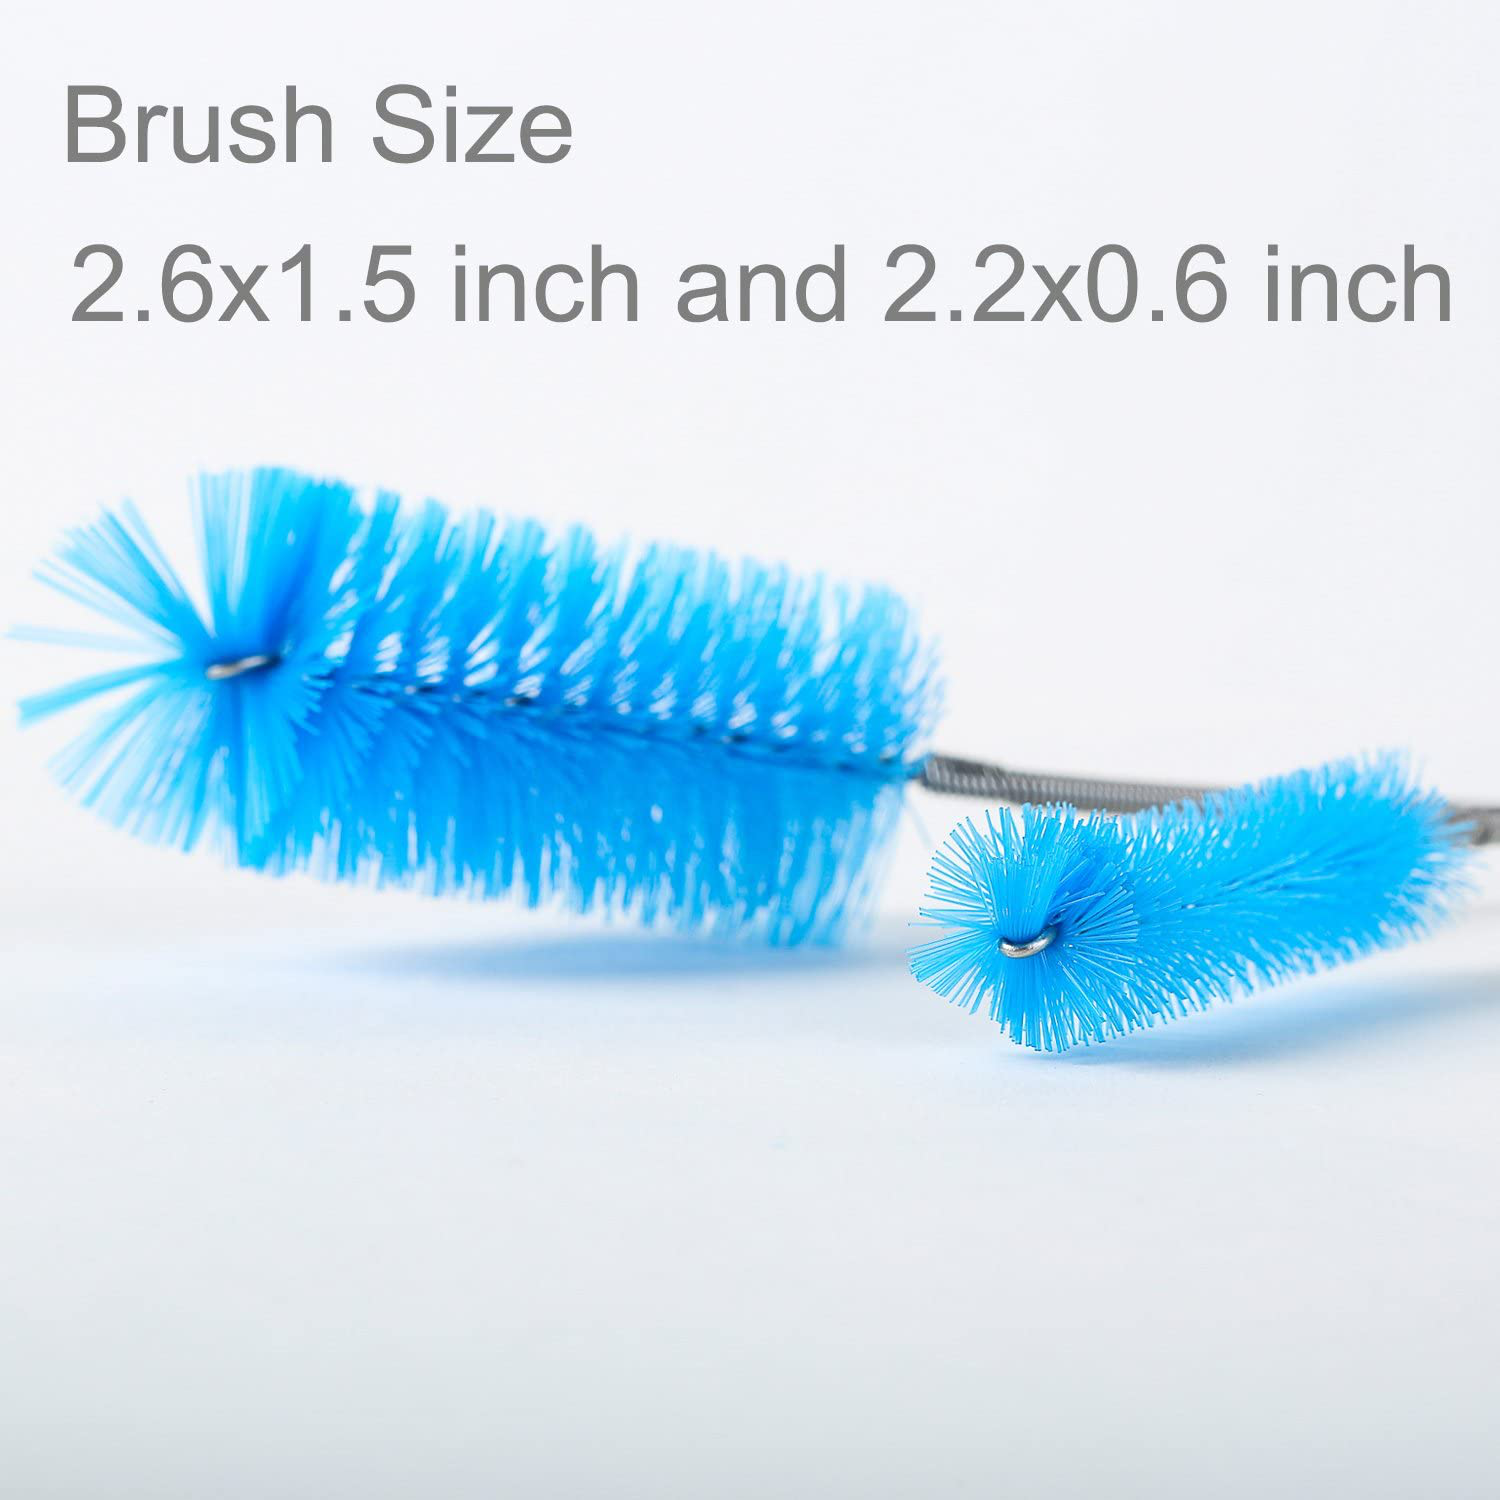 Buy COLOURFUL - Aquarium Cleaning Tool for Fish Tank Cleaner